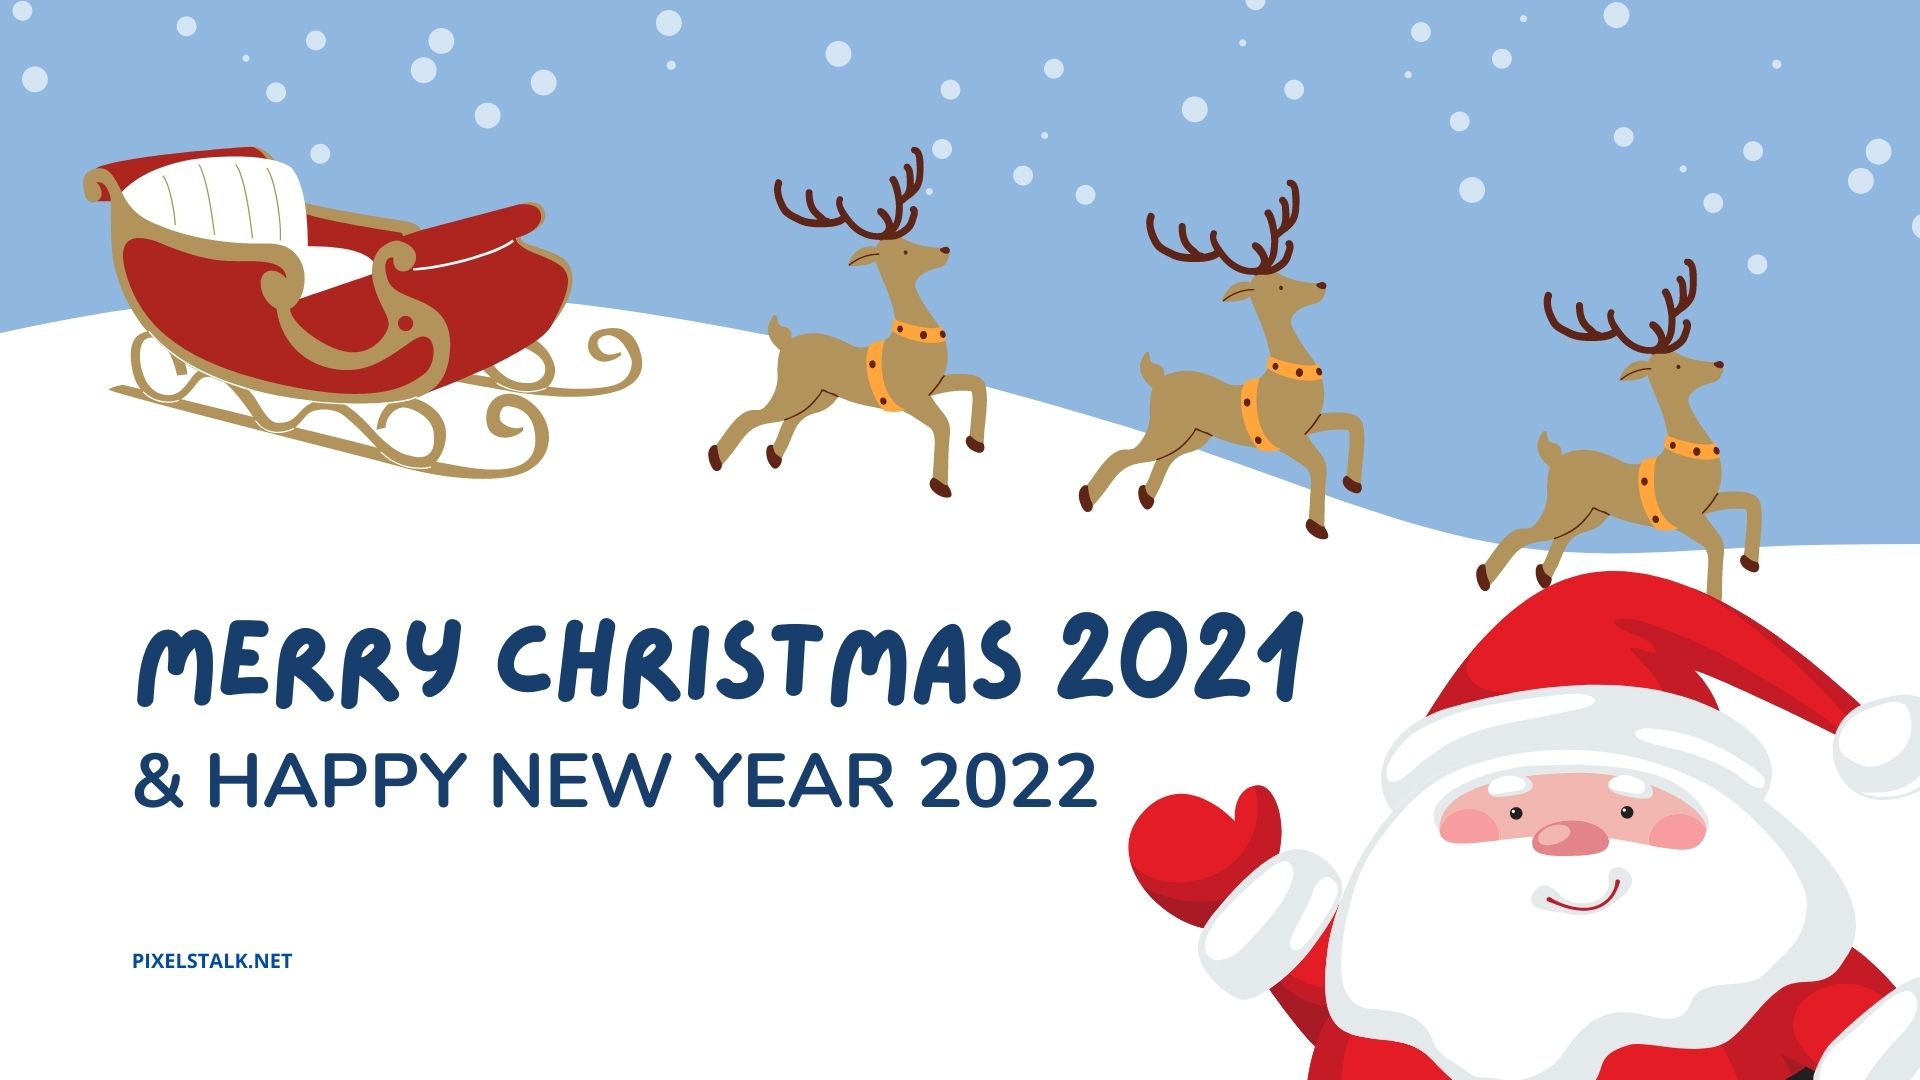 Merry Christmas 2021 and Happy new Year 2022 1920x1080